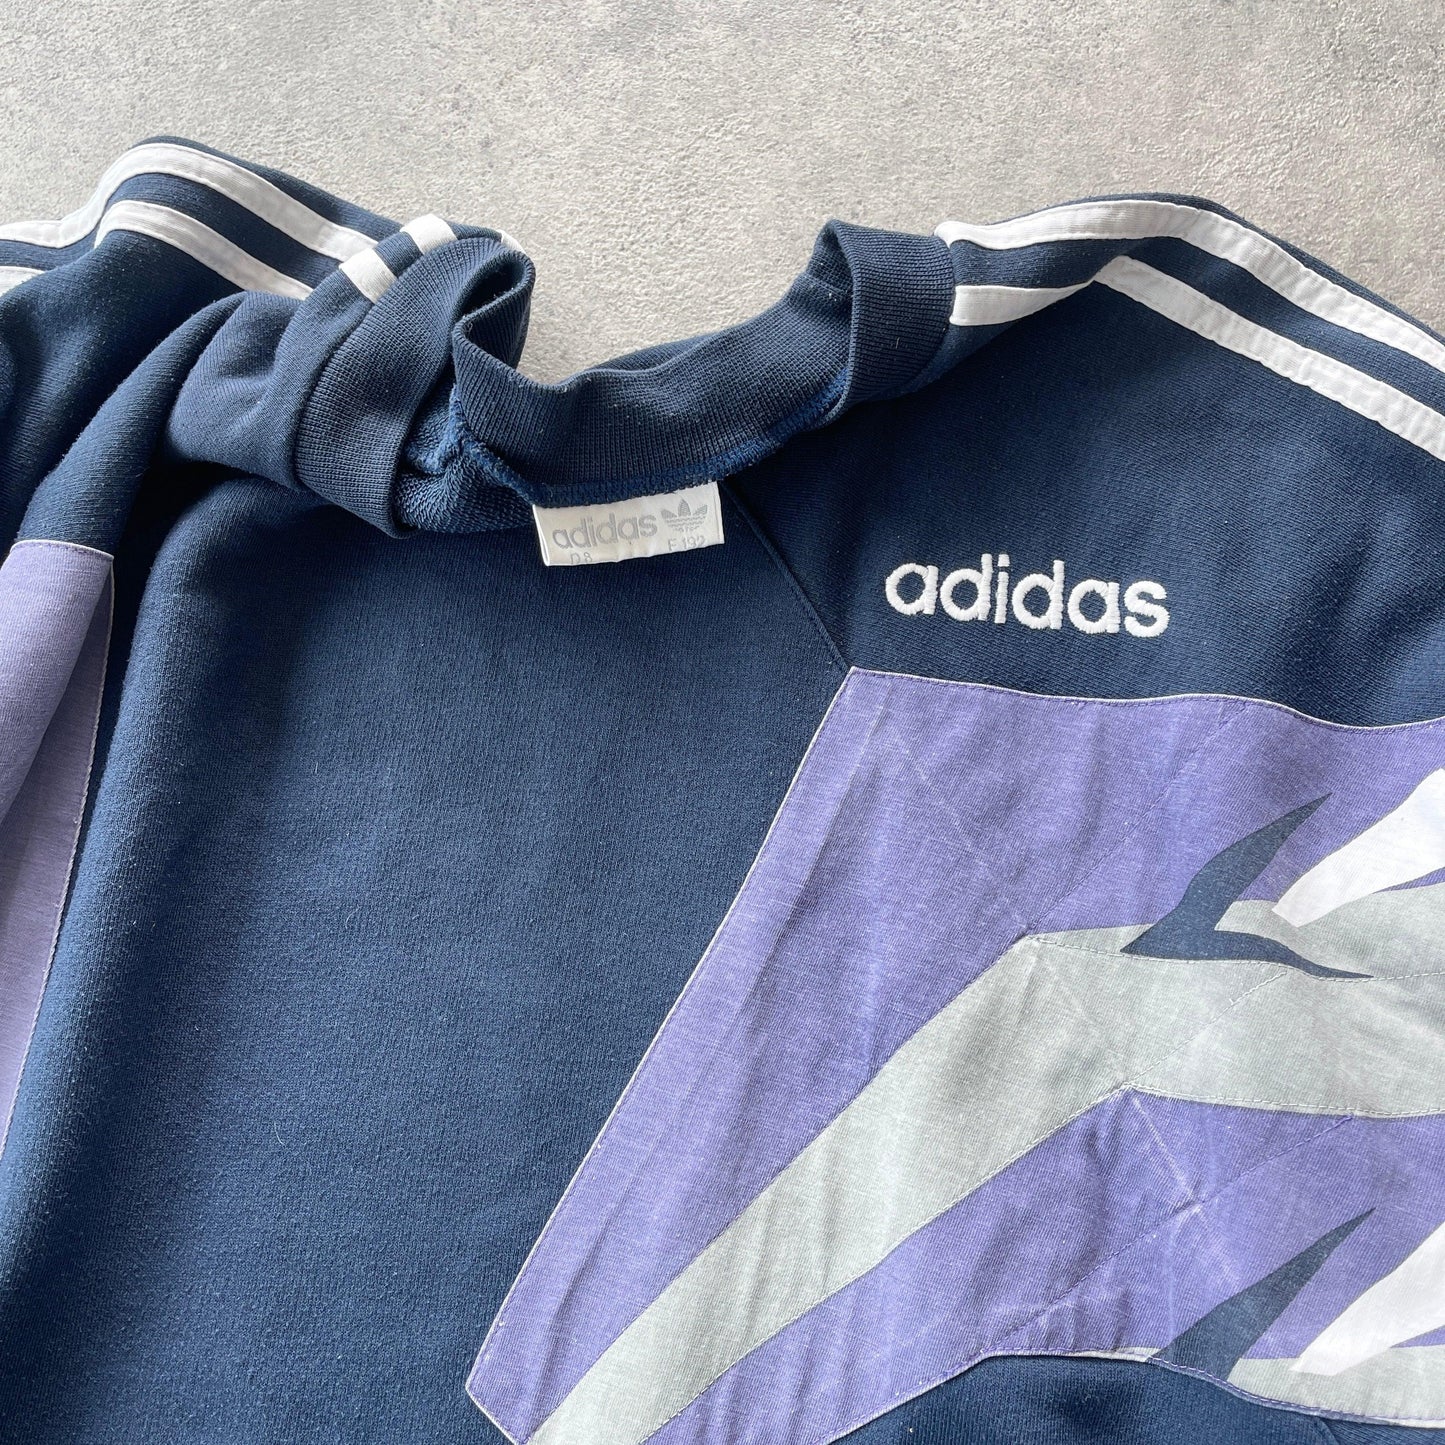 Adidas 1990s colour block embroidered graphic sweatshirt (L) - Known Source